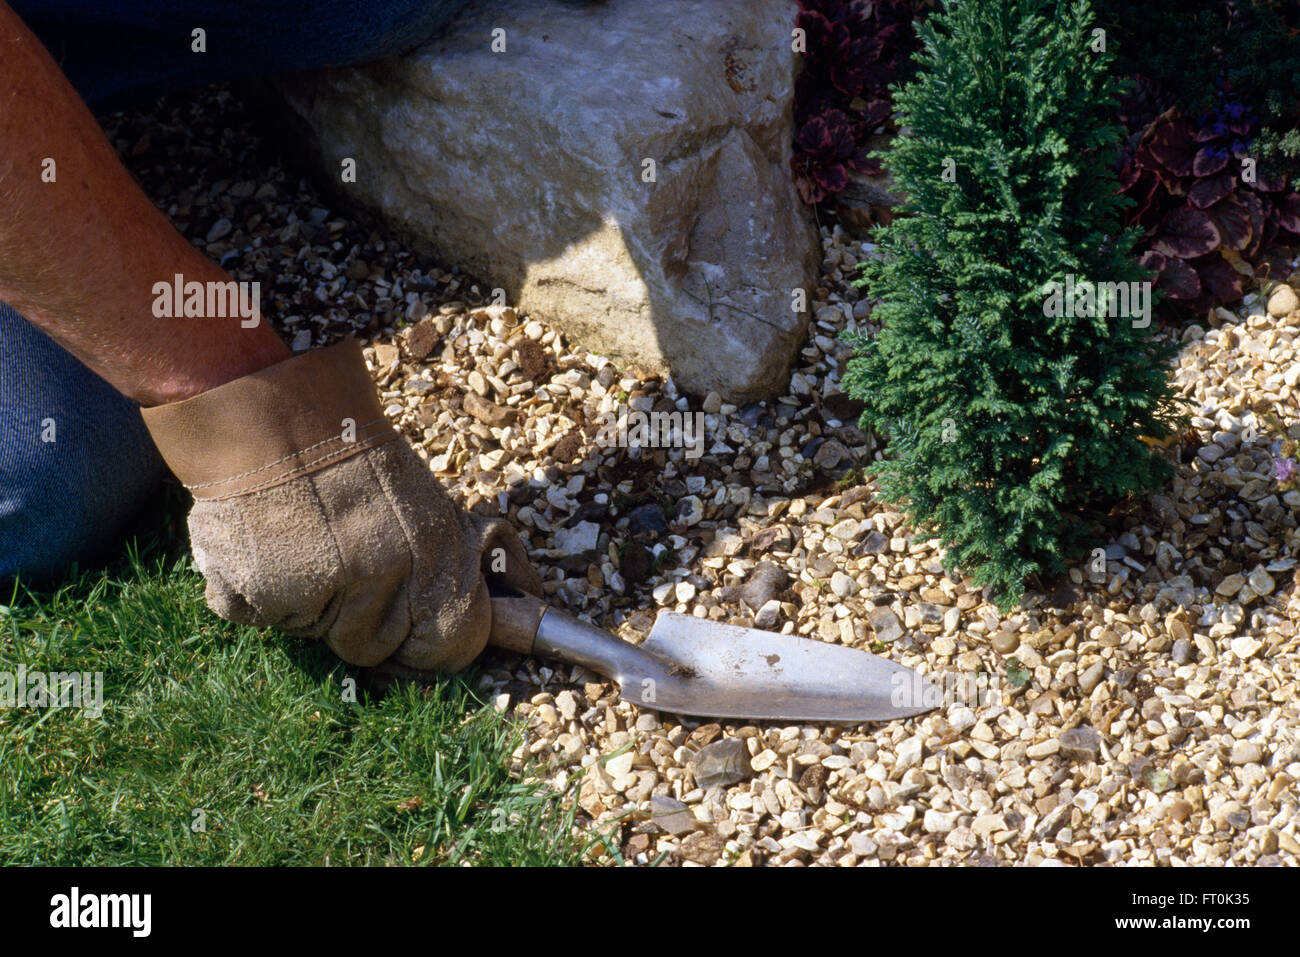 Close-up of hands smoothing down newly applied gravel around a dwarf conifer Stock Photo